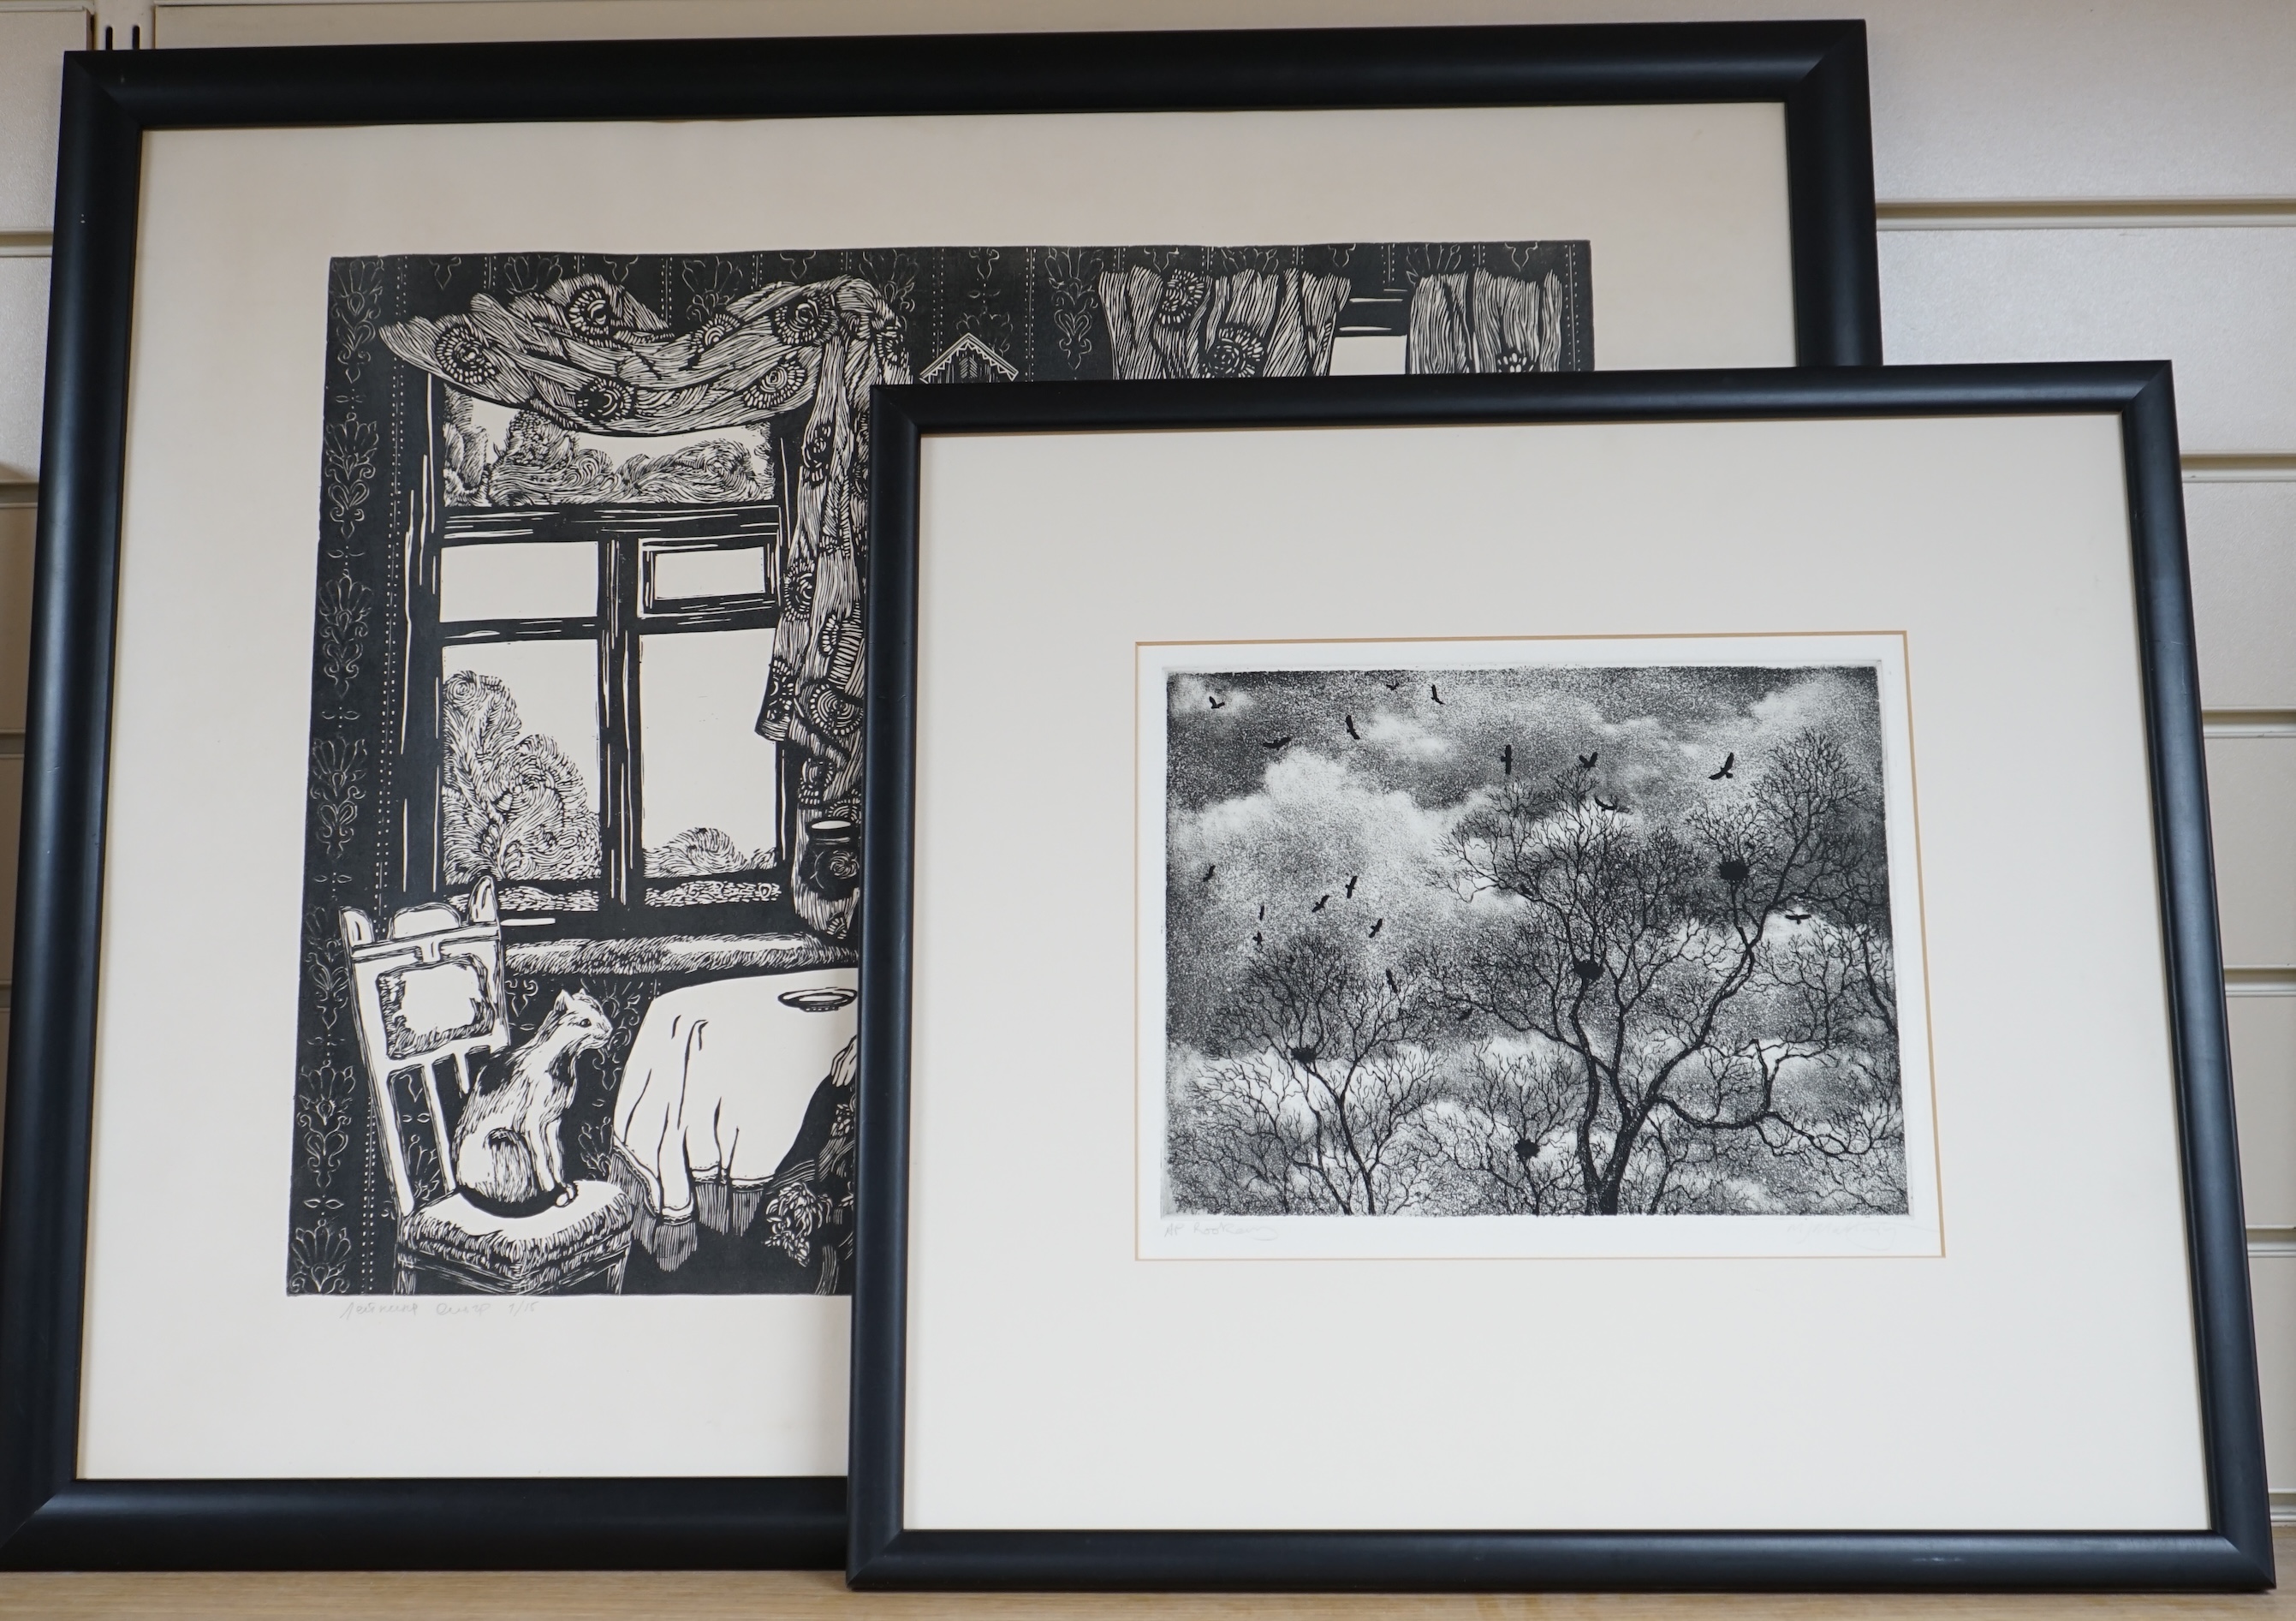 Michael Mattingley, artists proof etching, ‘Rookery’, together with Olga Leykina, linocut, ‘Breakfast’, limited edition 1/15, each signed in pencil, largest 52 x 64cm. Condition - fair to good